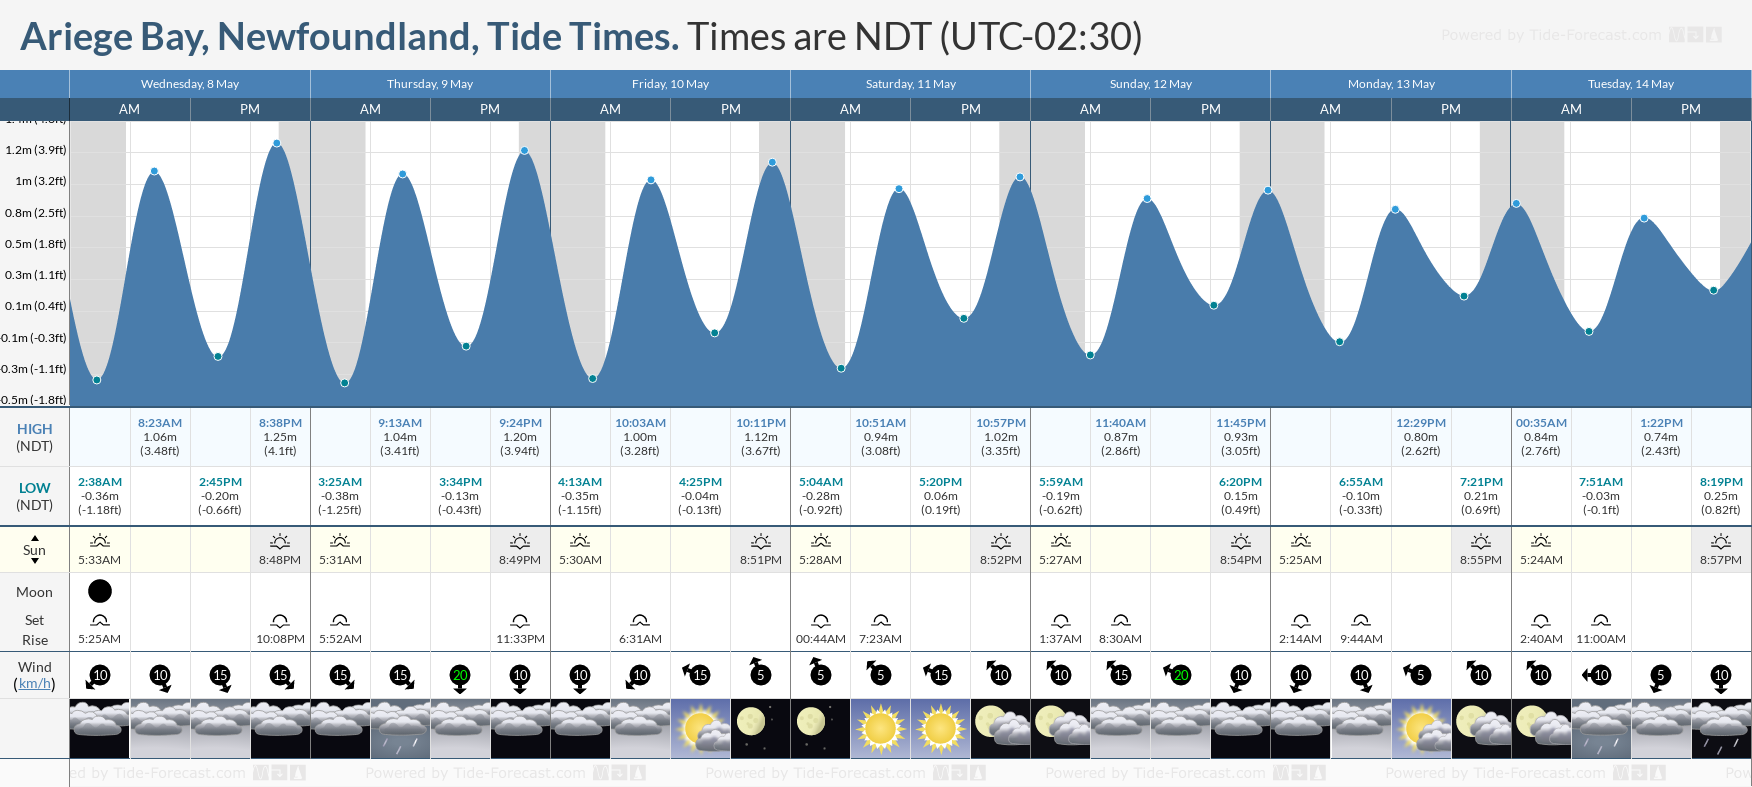 Ariege Bay, Newfoundland Tide Chart including high and low tide tide times for the next 7 days